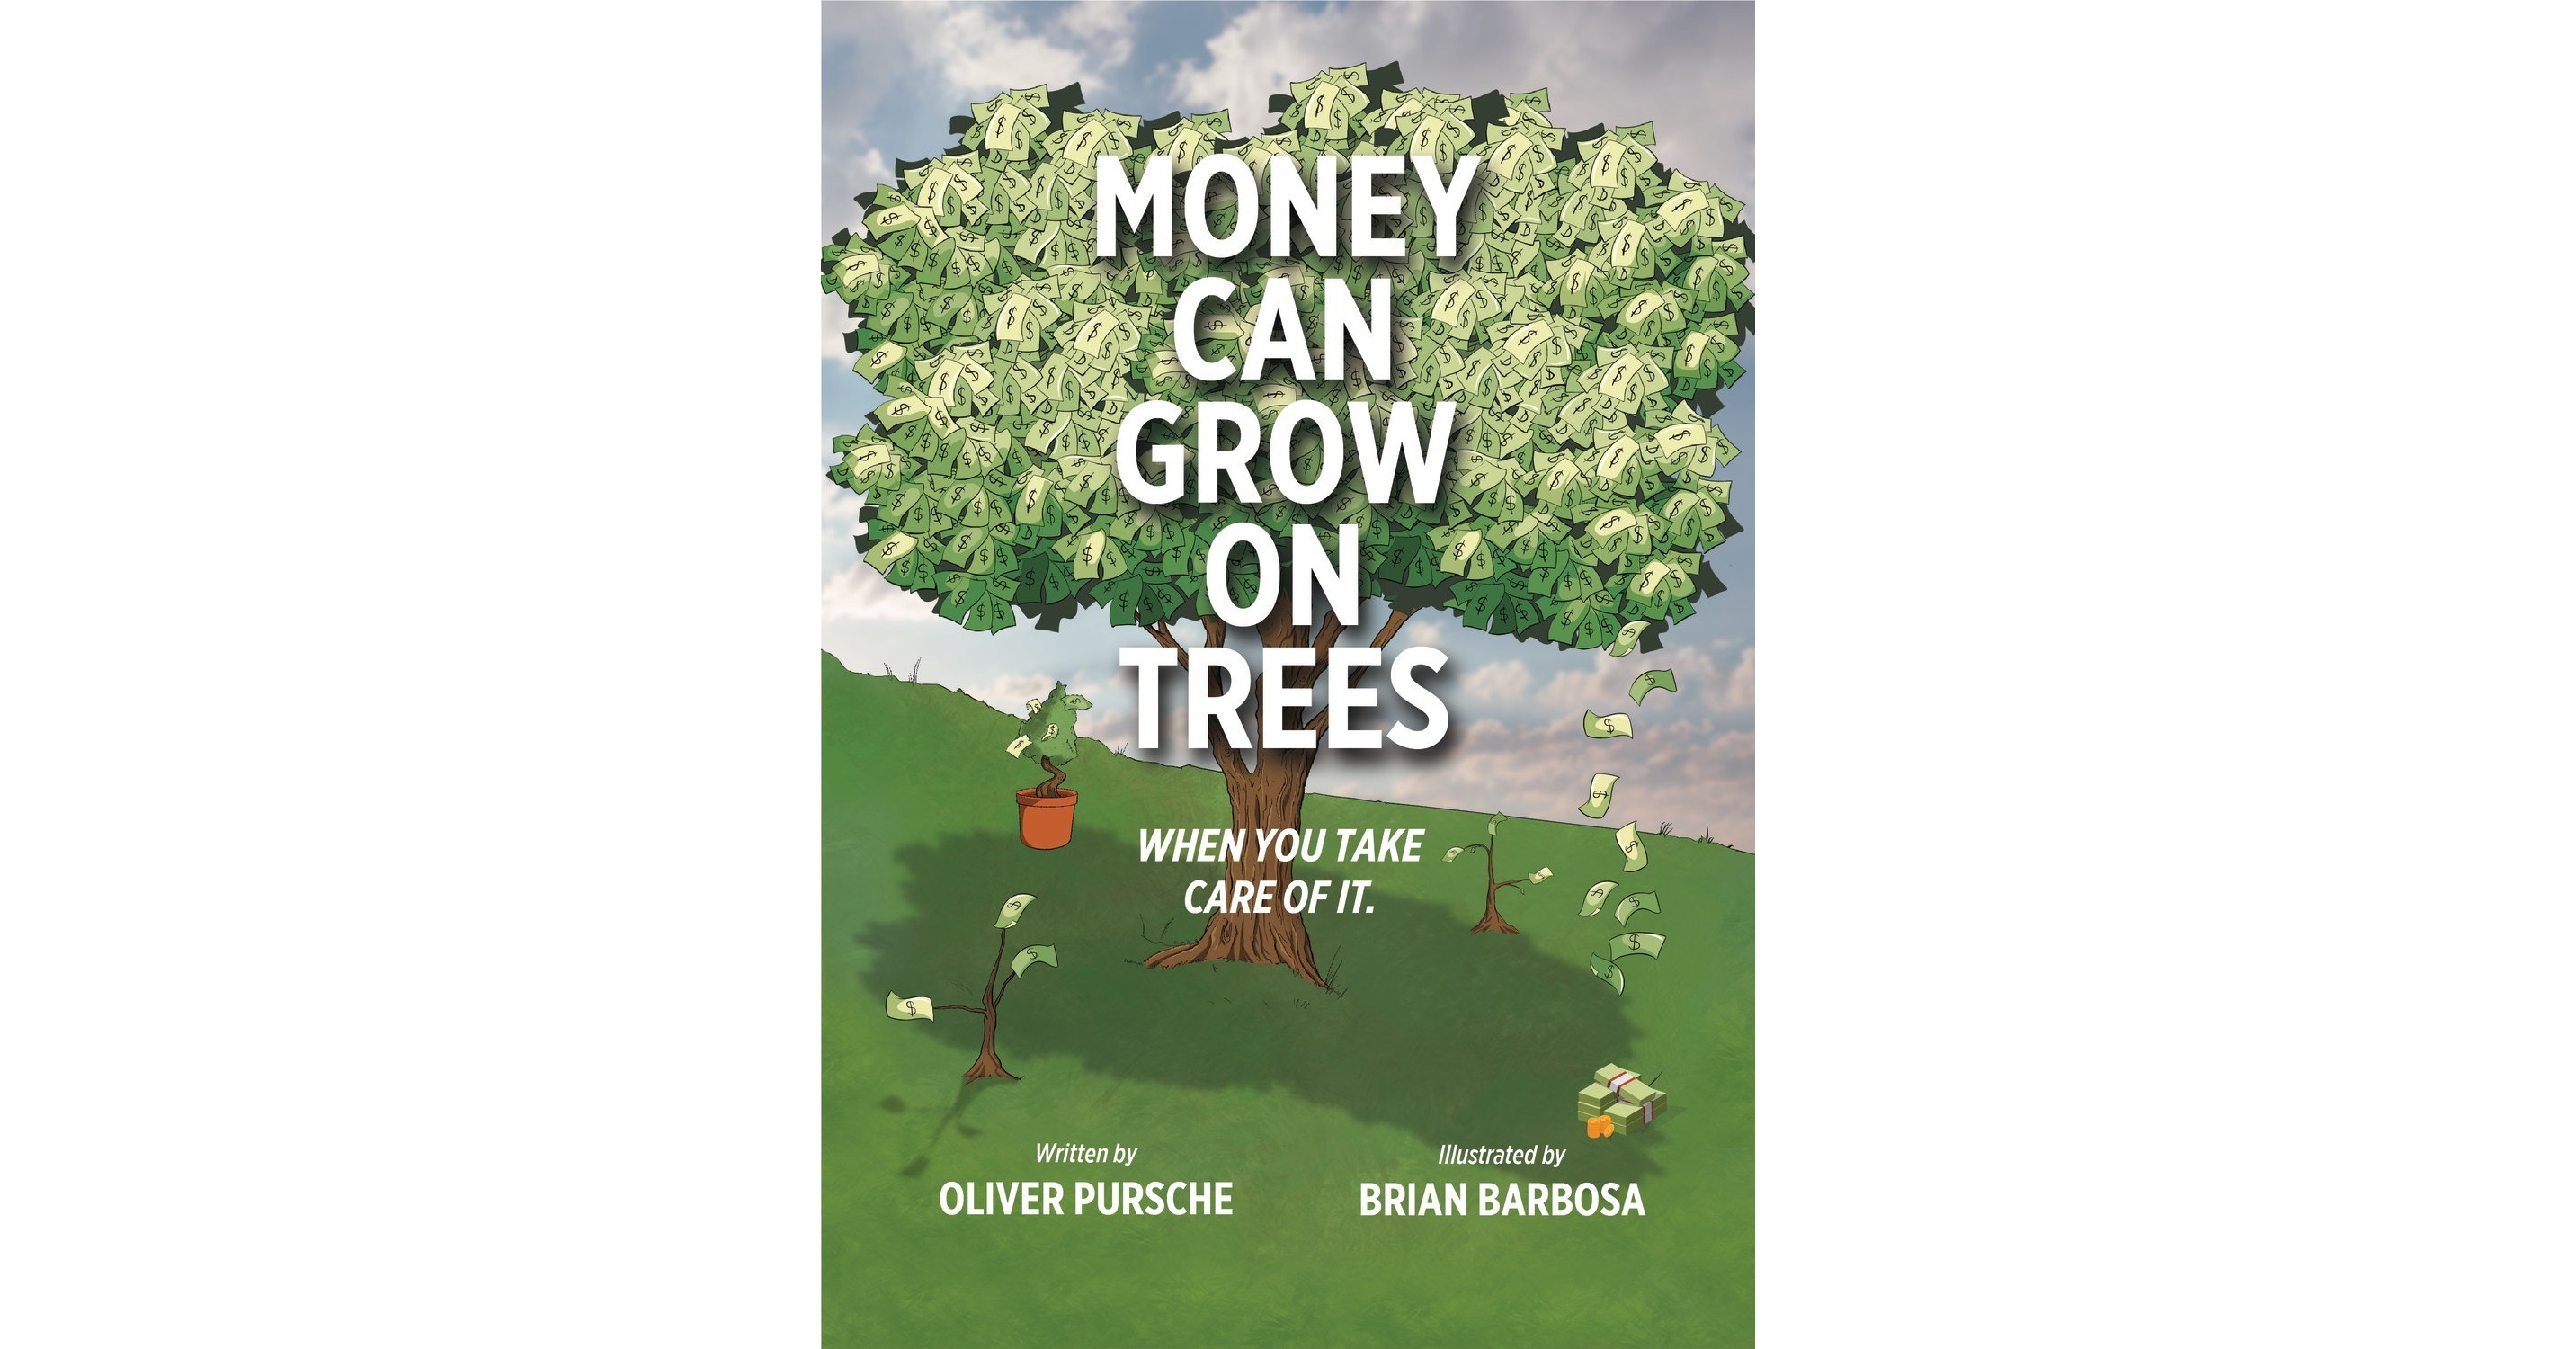 MONEY CAN GROW ON TREES: WHEN YOU TAKE CARE OF IT HITS BOOKSHELVES AND DIGITAL PLATFORMS